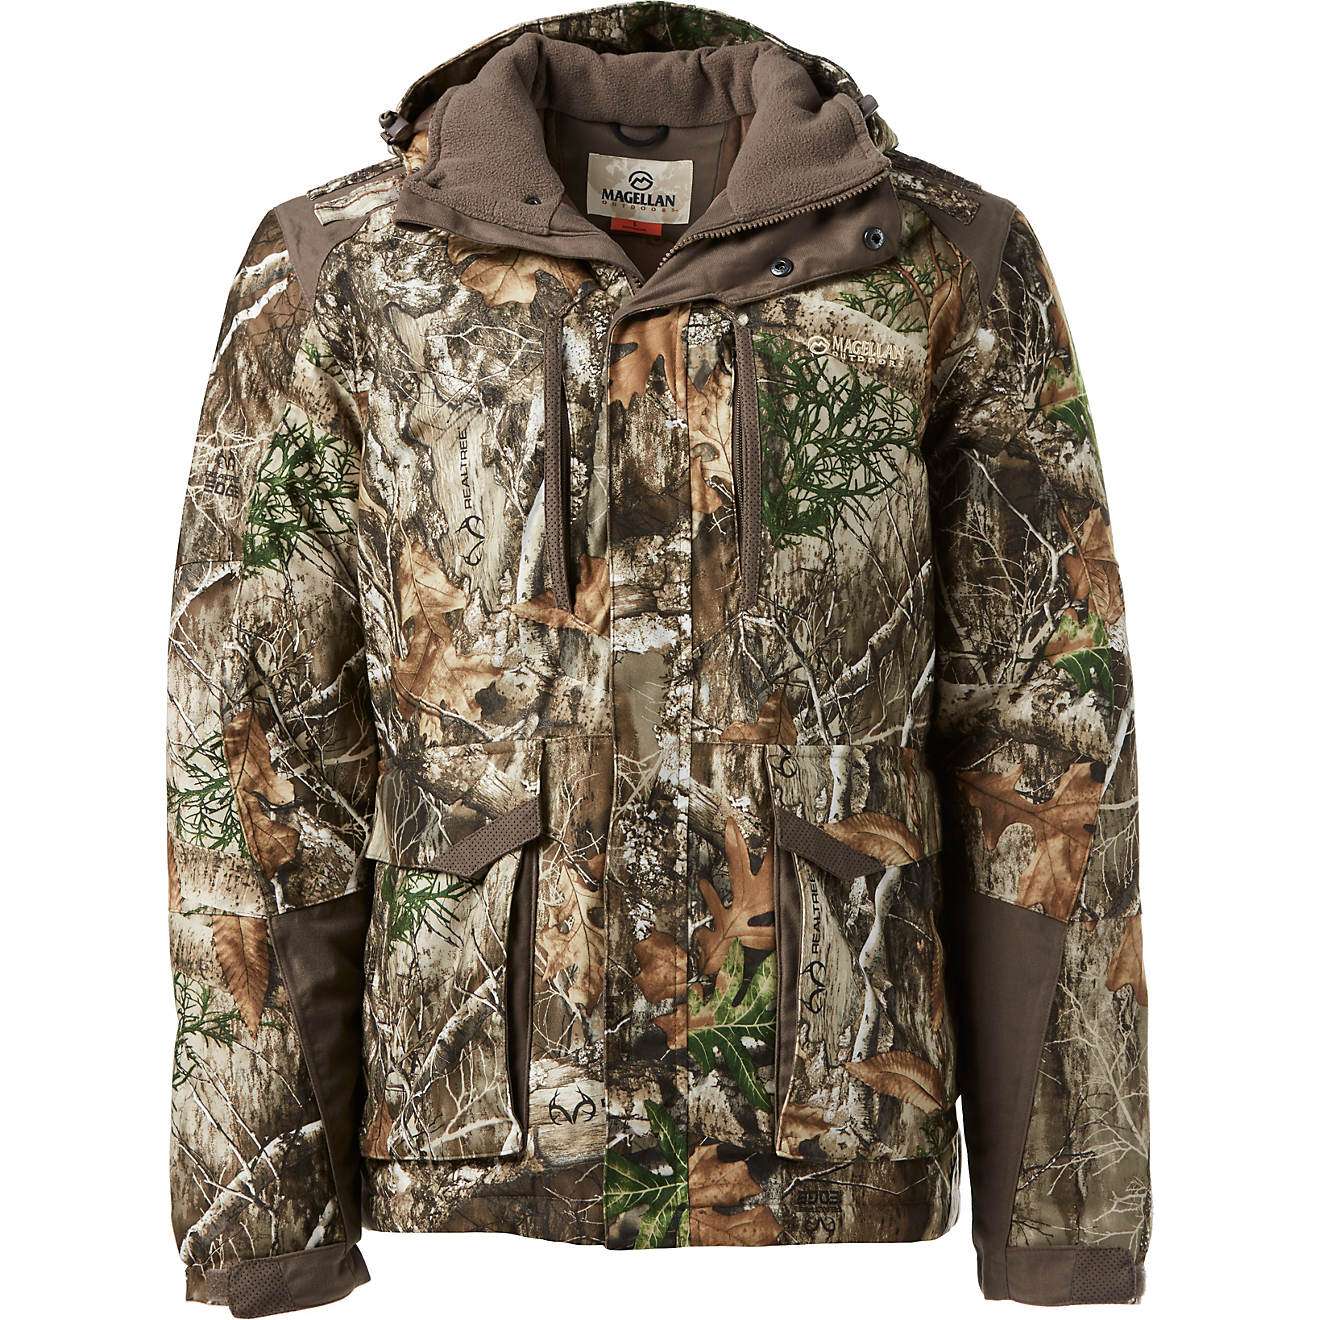 <p><strong>Magellan Outdoors Men's Ozark Insulated Waist Jacket</strong><br> Don't get caught out in the cold this fall while in the stand or blind. Magellan's Men's Ozark Insulated Waist Jacket is a jacket that is goin to keep you warm, dry and protected from the wind while not breaking the bank. <a href=